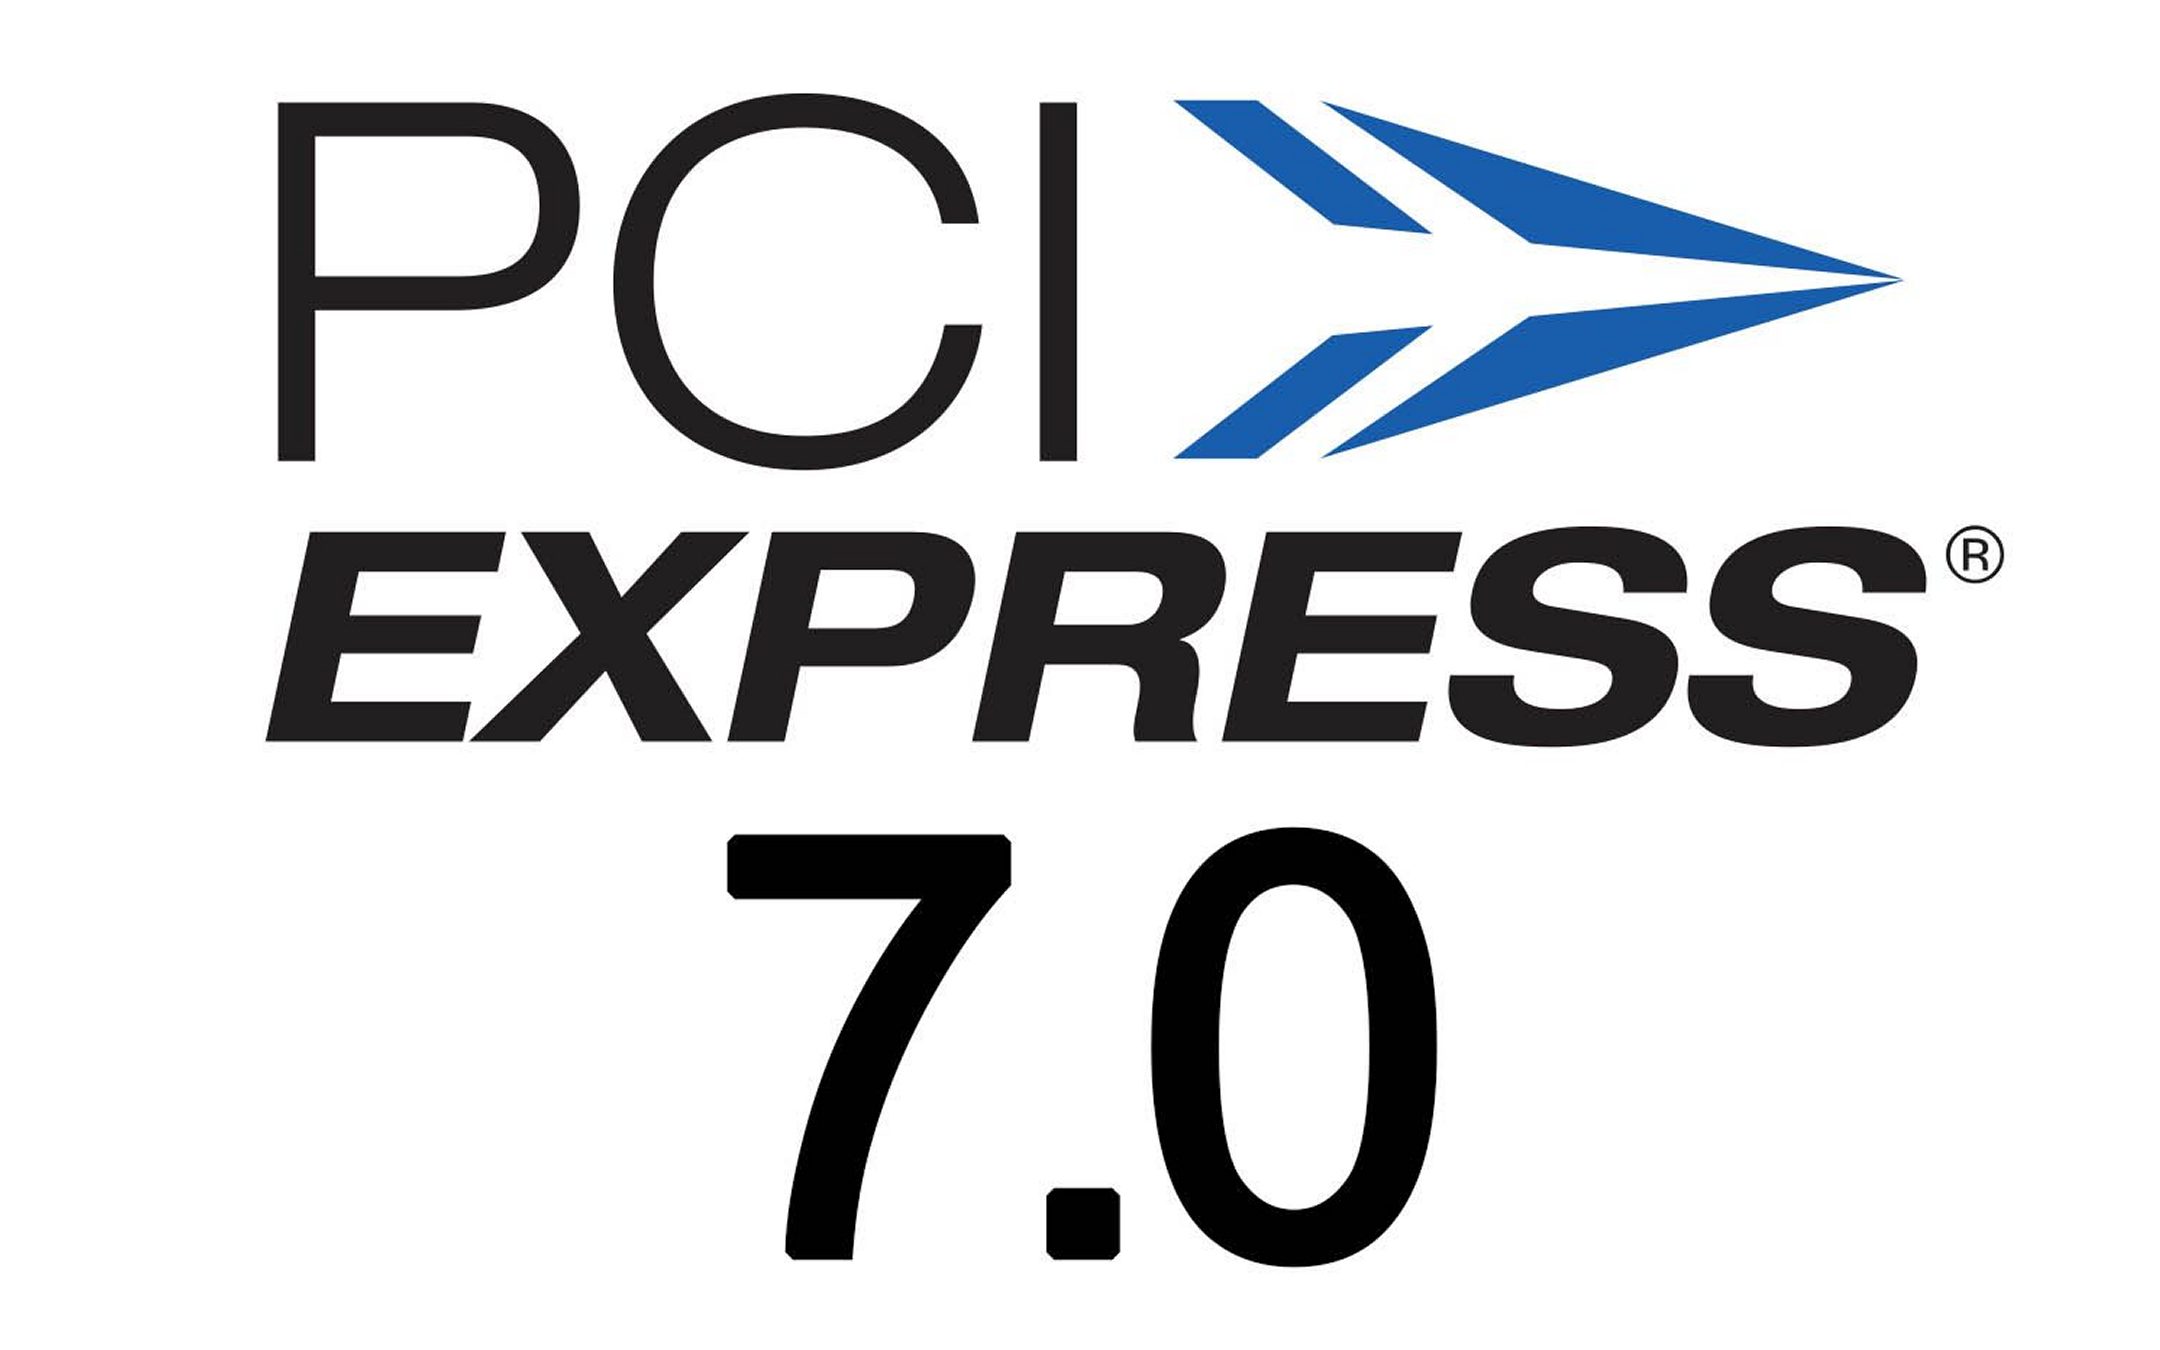 PCIe 7.0: Transfer speeds up to 512GB/s for the new interface